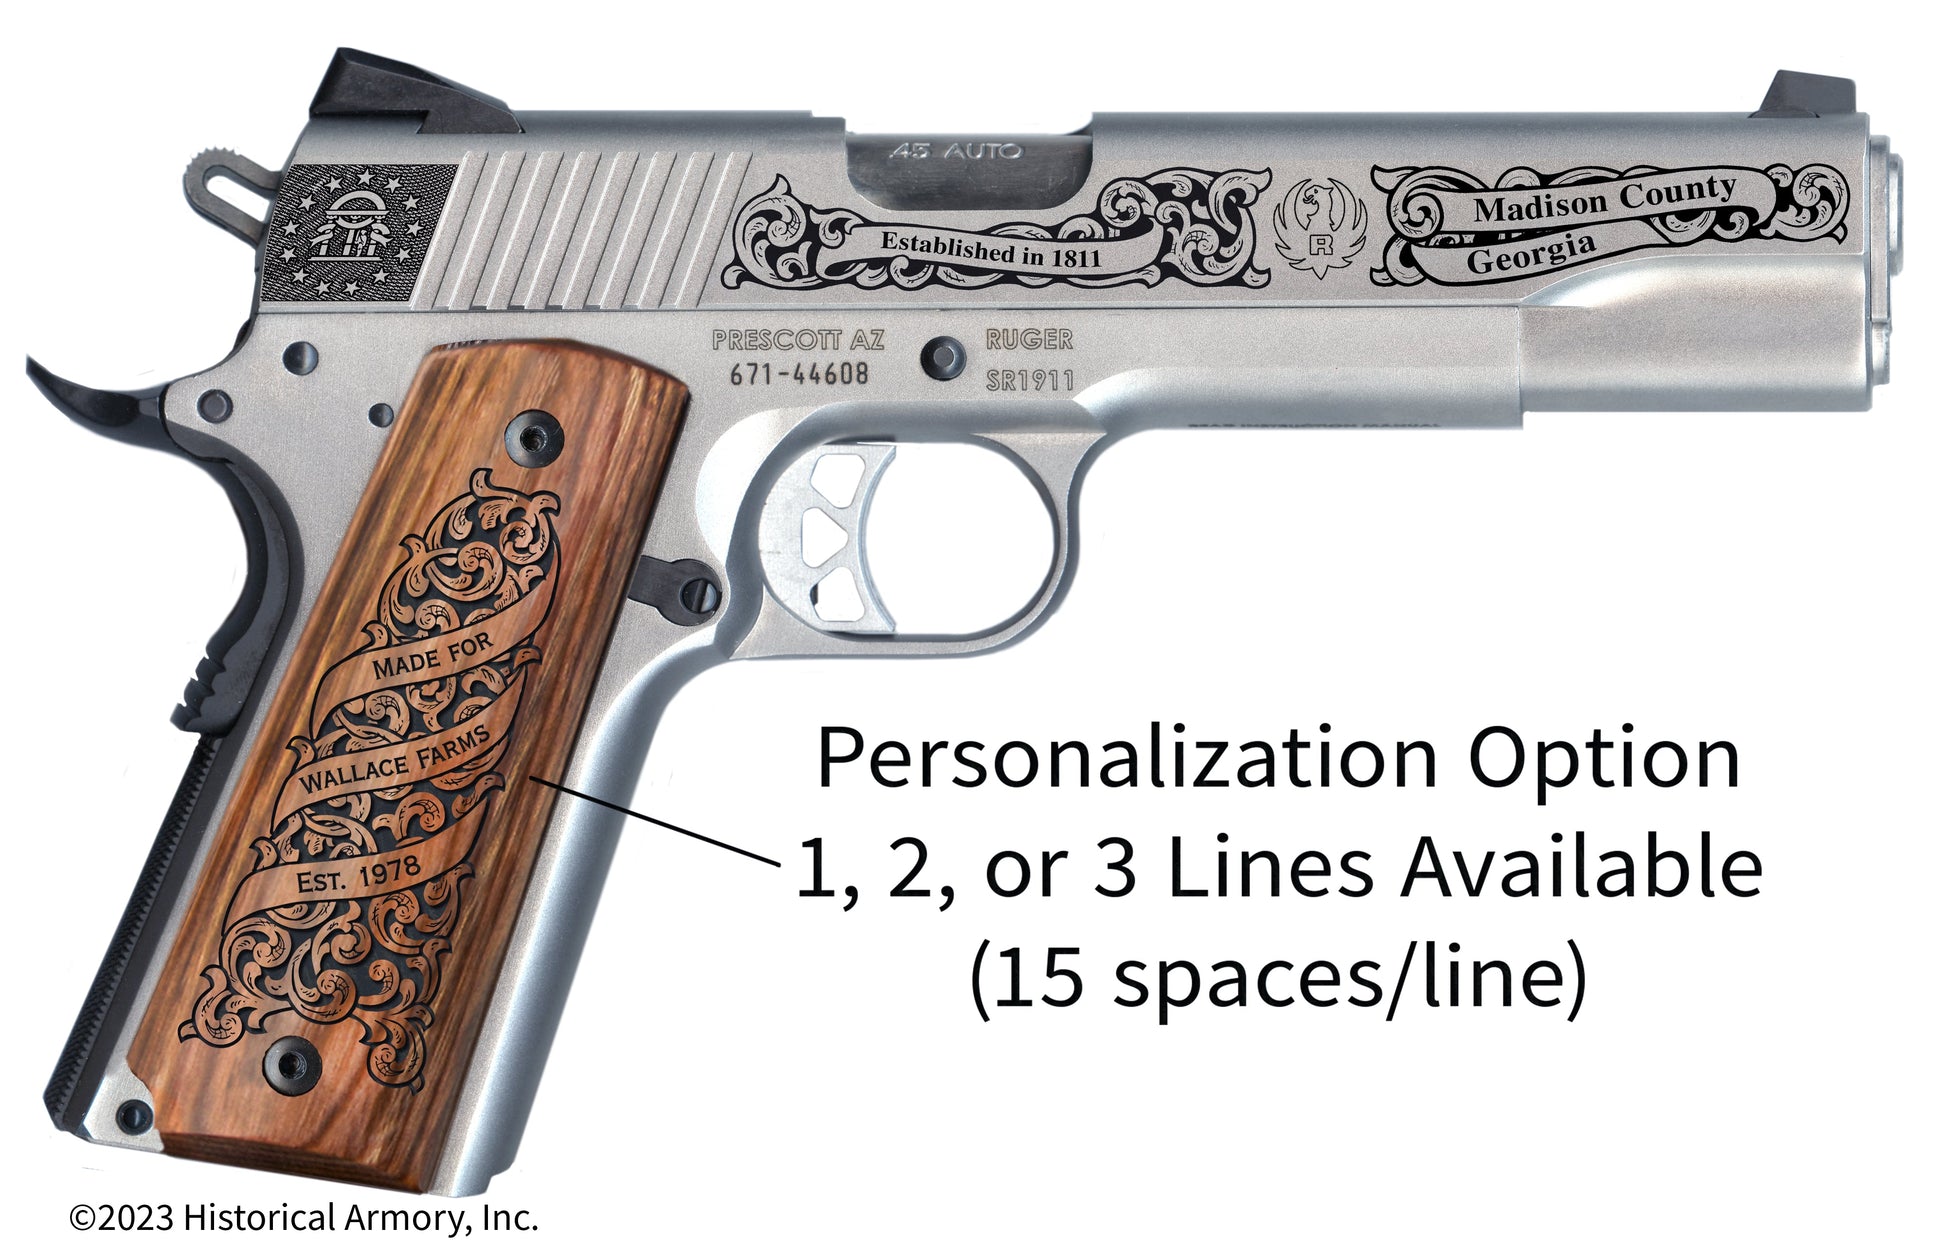 Madison County Georgia Personalized Engraved .45 Auto Ruger 1911